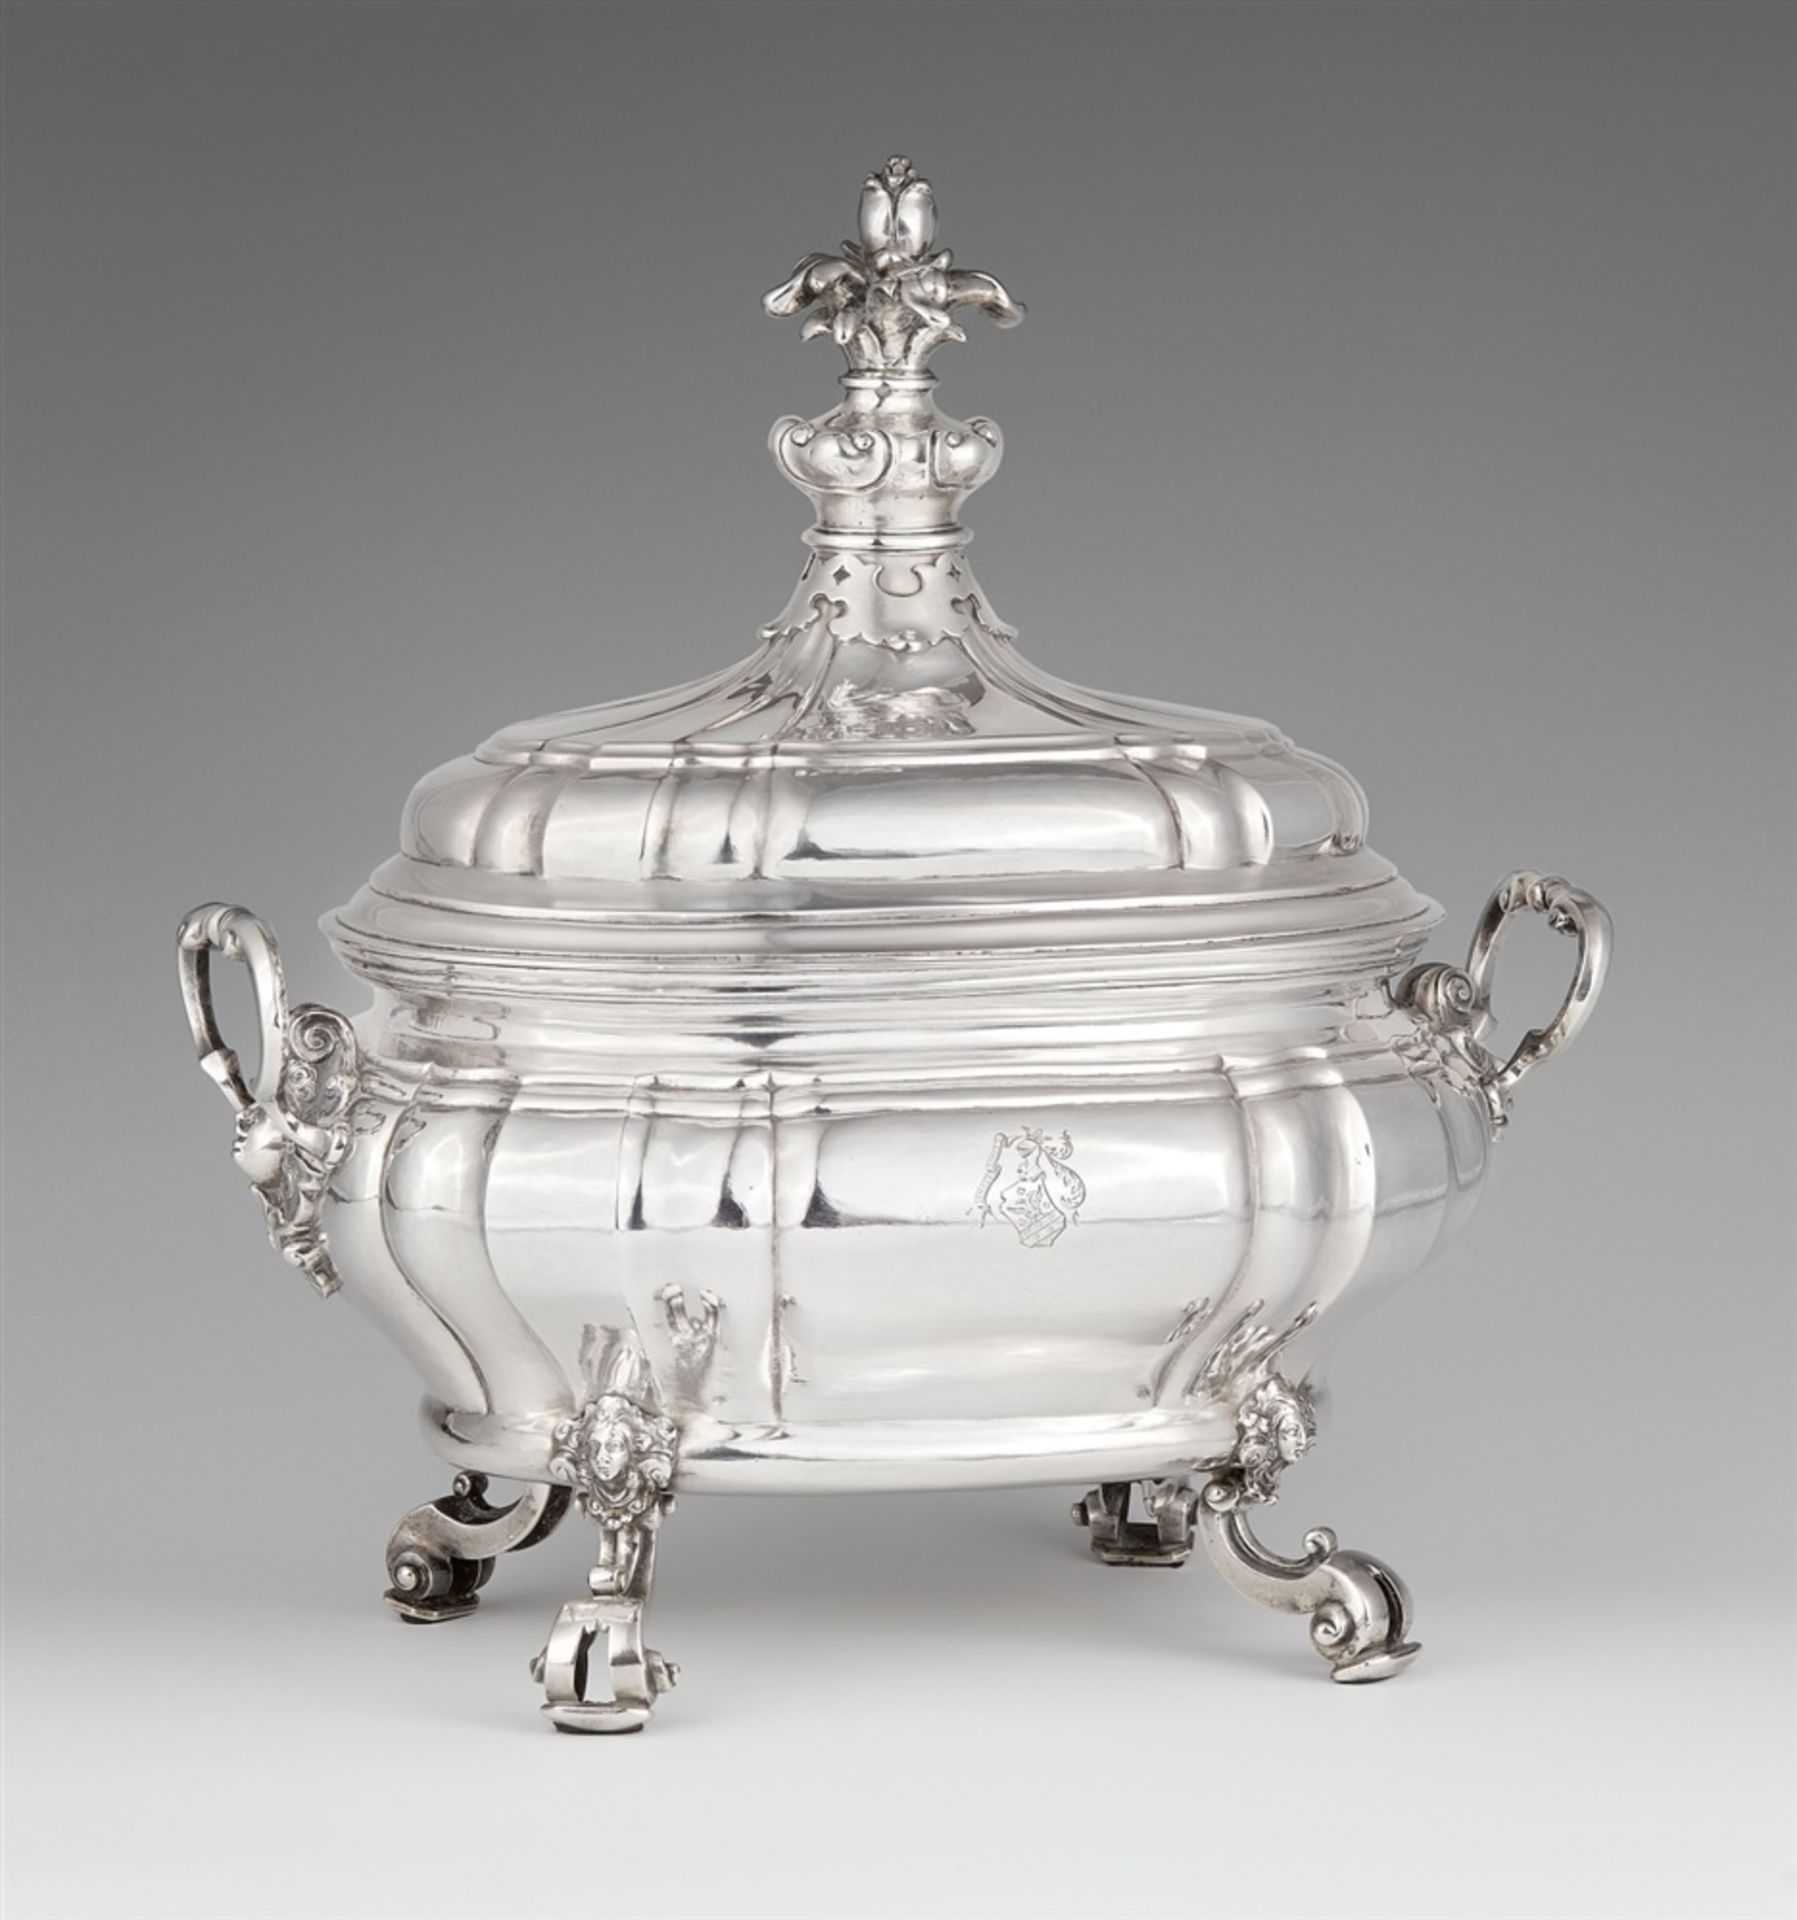 A large Riga silver tureenSilver; gold-plated inside. A large fluted oval tureen with gilt